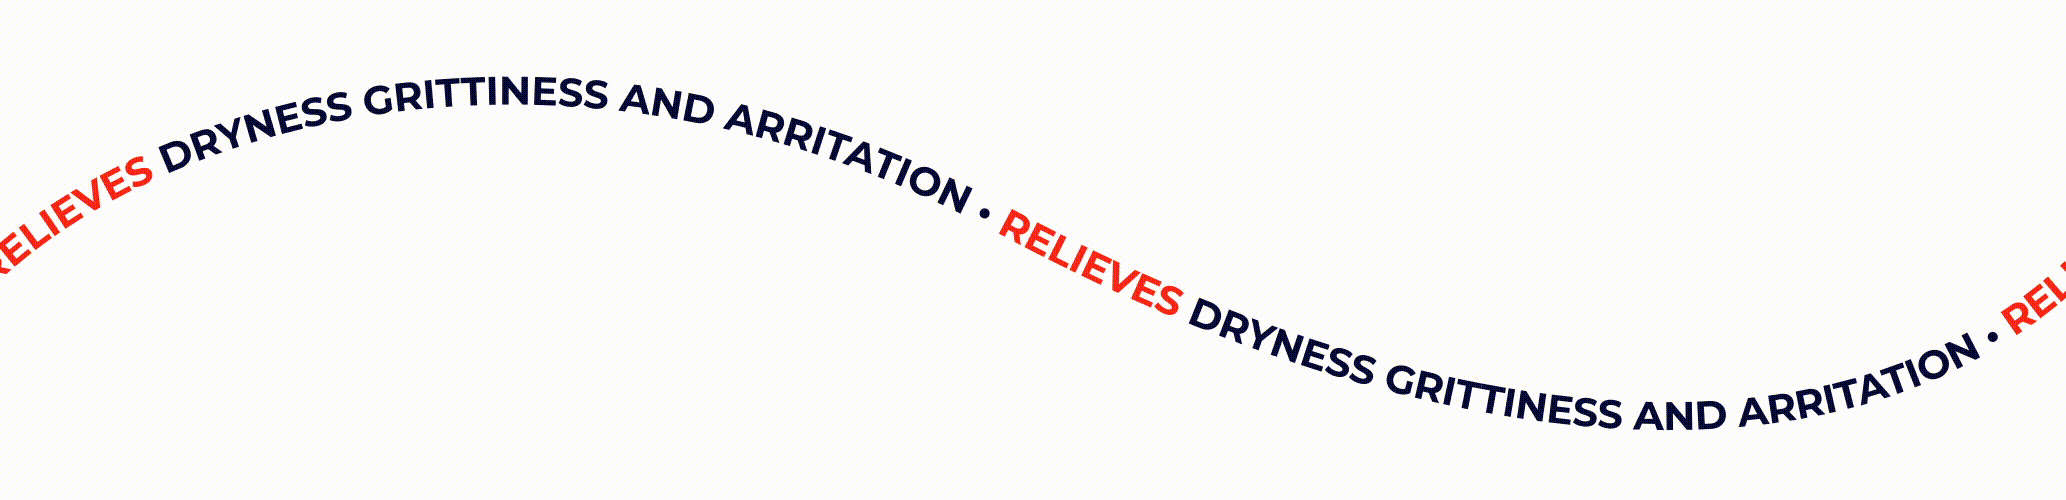 relieves dryness grittiness and irritation graphic for the splash tears website